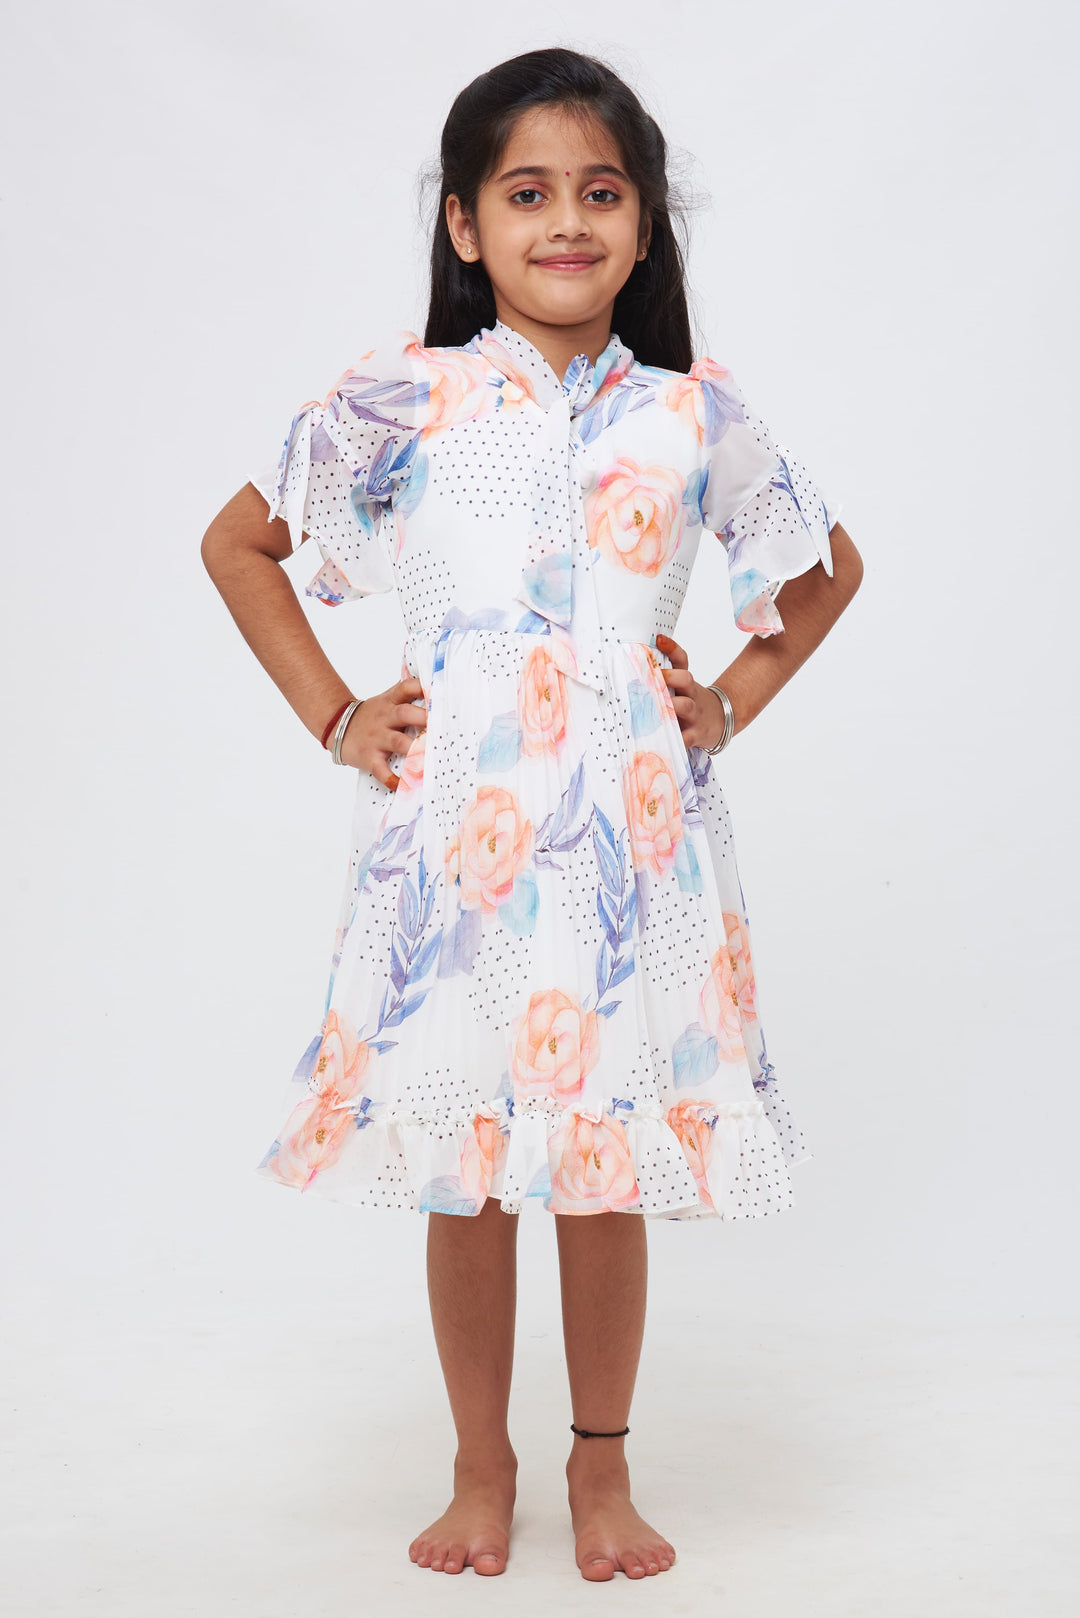 The Nesavu Girls Fancy Frock Elegant Whimsical Watercolor Roses Dress - Classic Charm for Young Divas Nesavu 16 (1Y) / Orange / Poly Georgette GFC1169A-16 Girls Trendy Frock Designs | Adorable Frocks for the Modern Girl | The Nesavu